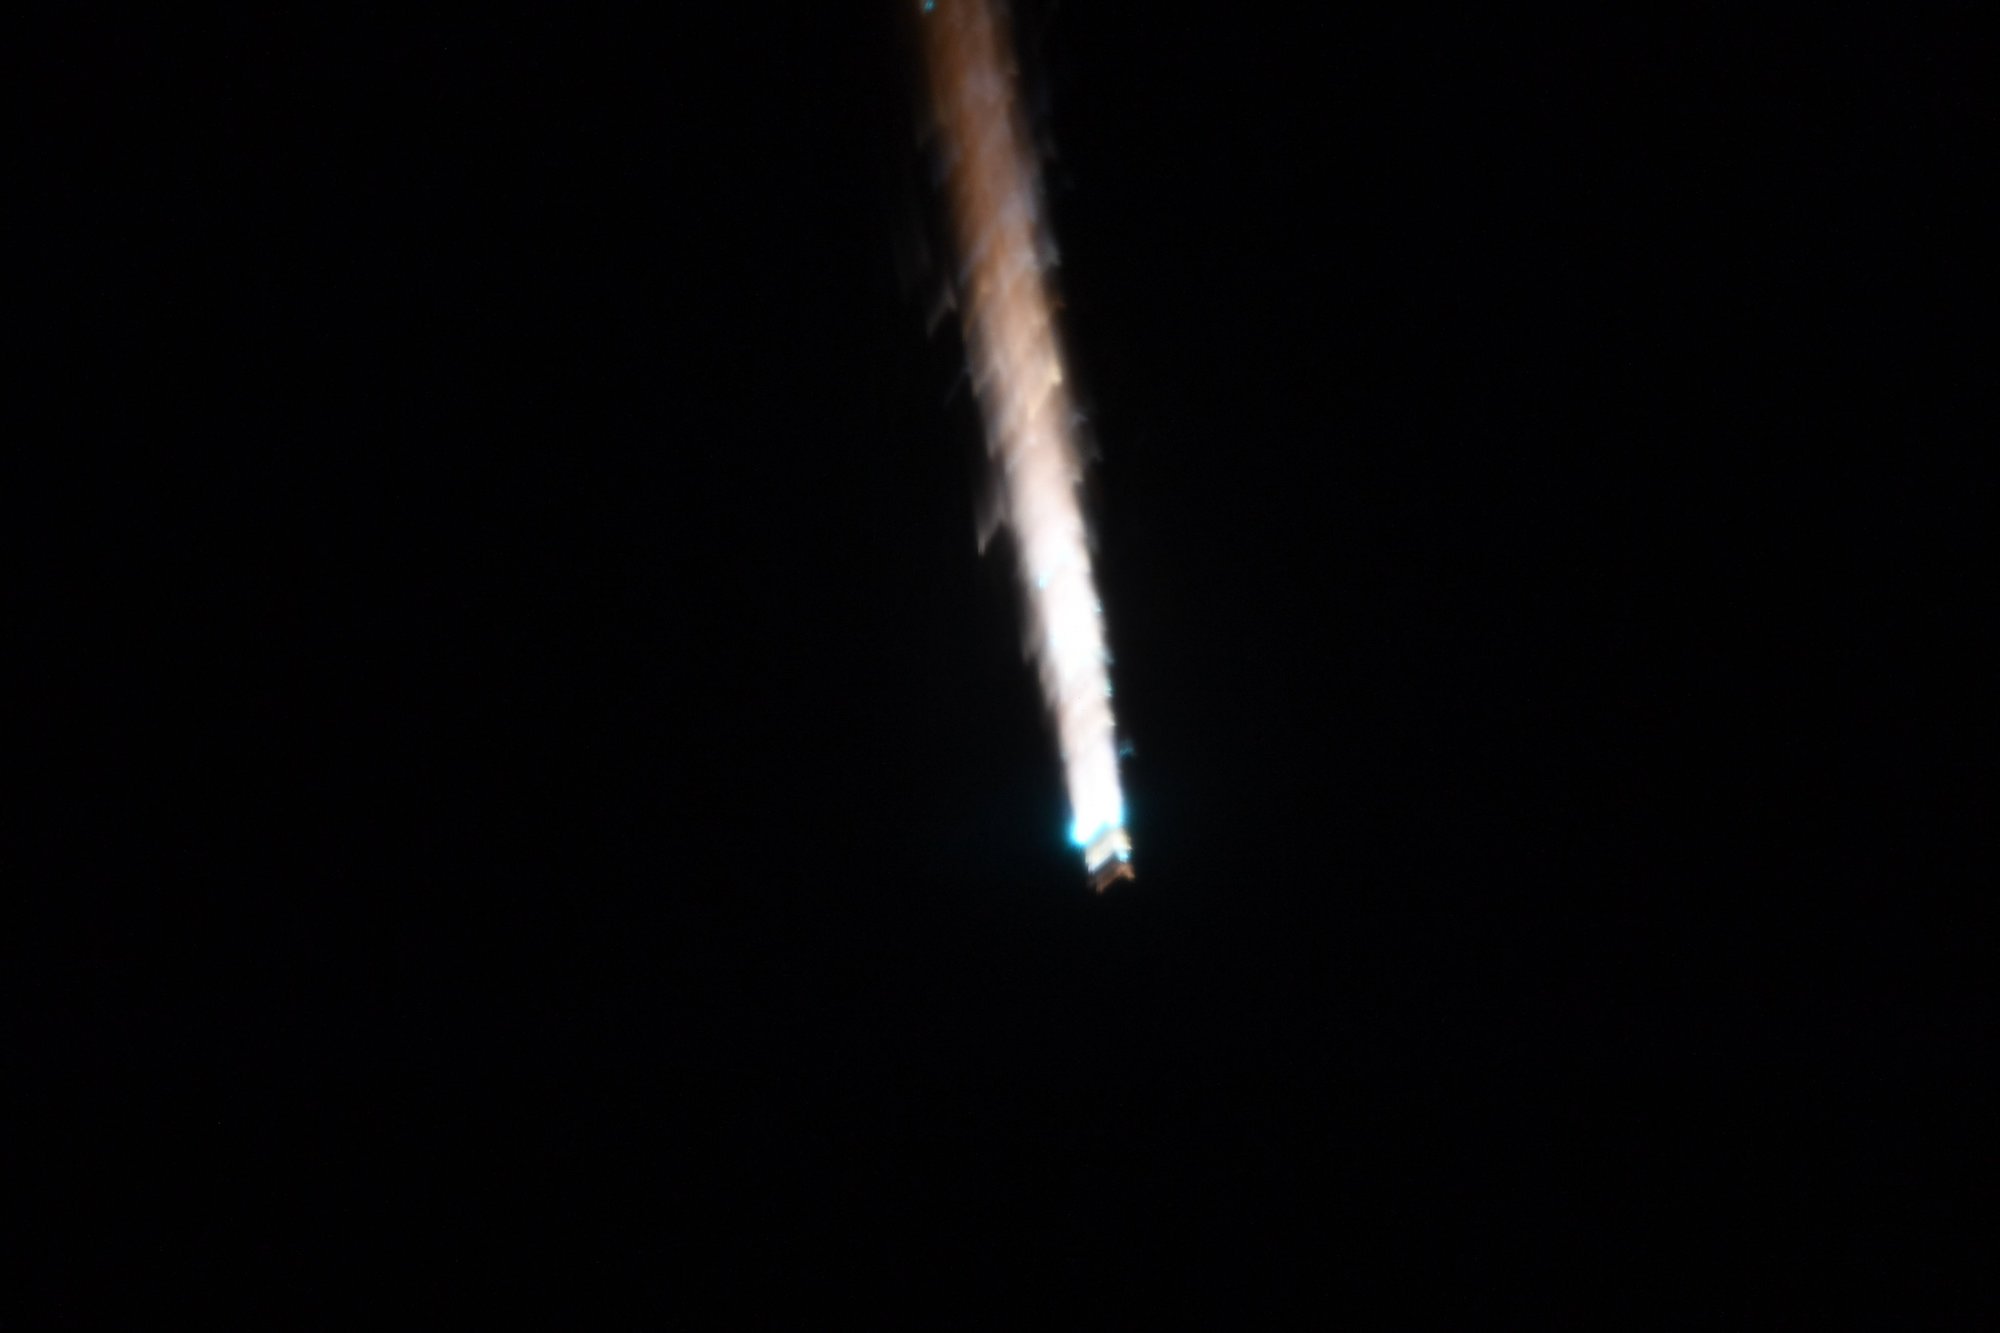 Russia's Progress MS-23 spacecraft burning up in Earth's atmosphere.